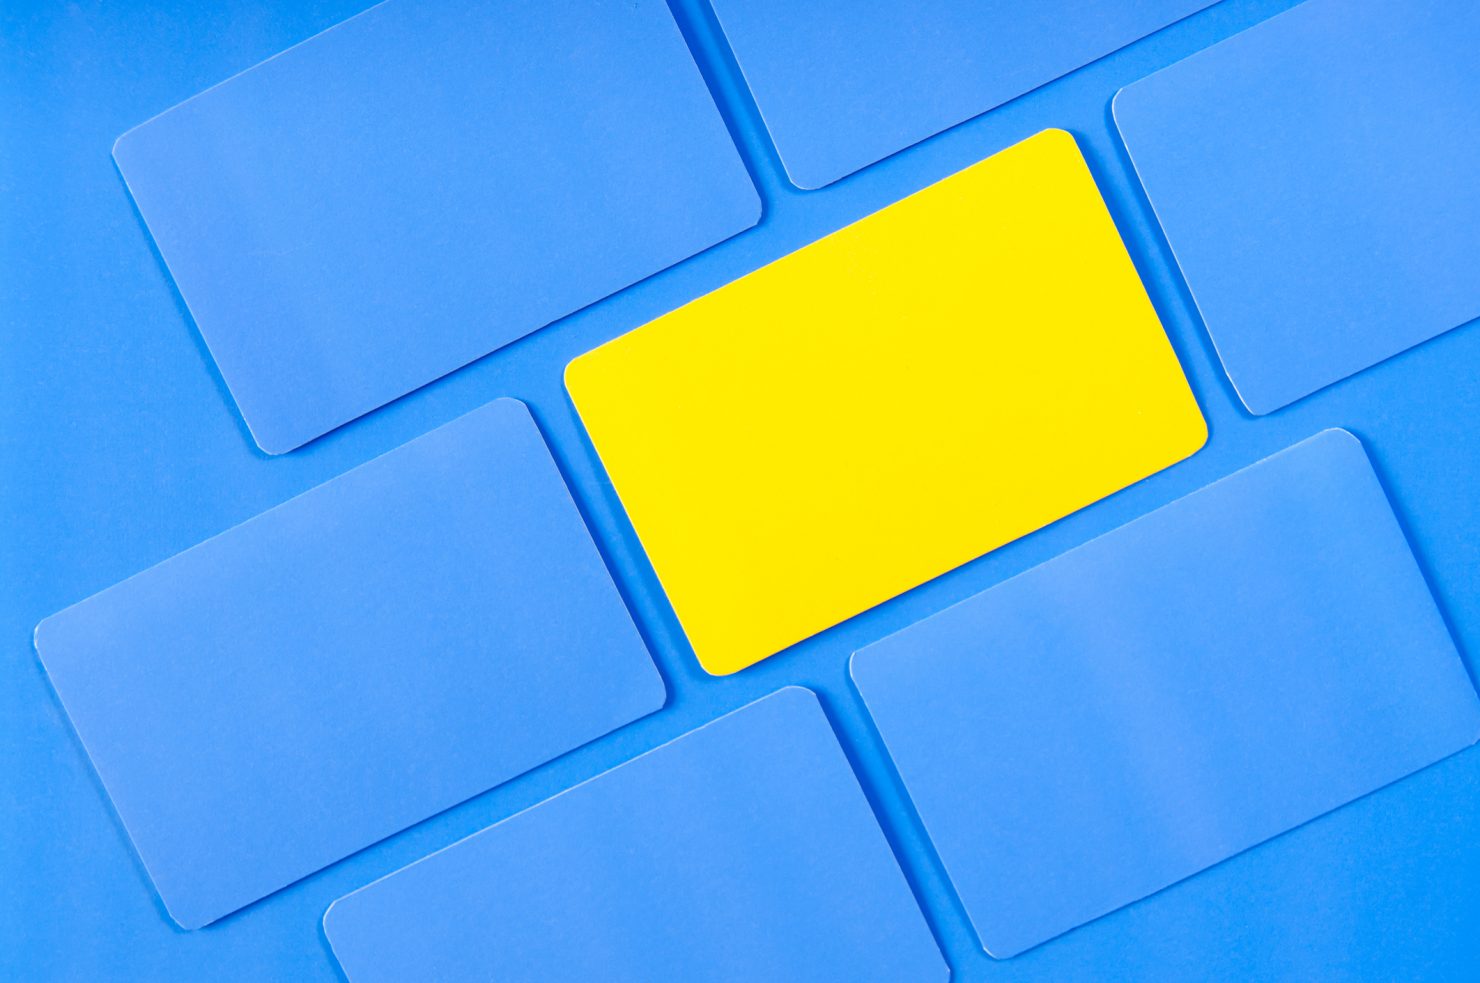 Photo of multiple square pieces of paper turned at an acute angle. All of the pieces of paper are blue save one in the middle which is yellow. This photo represents the importance of consistent visual branding.